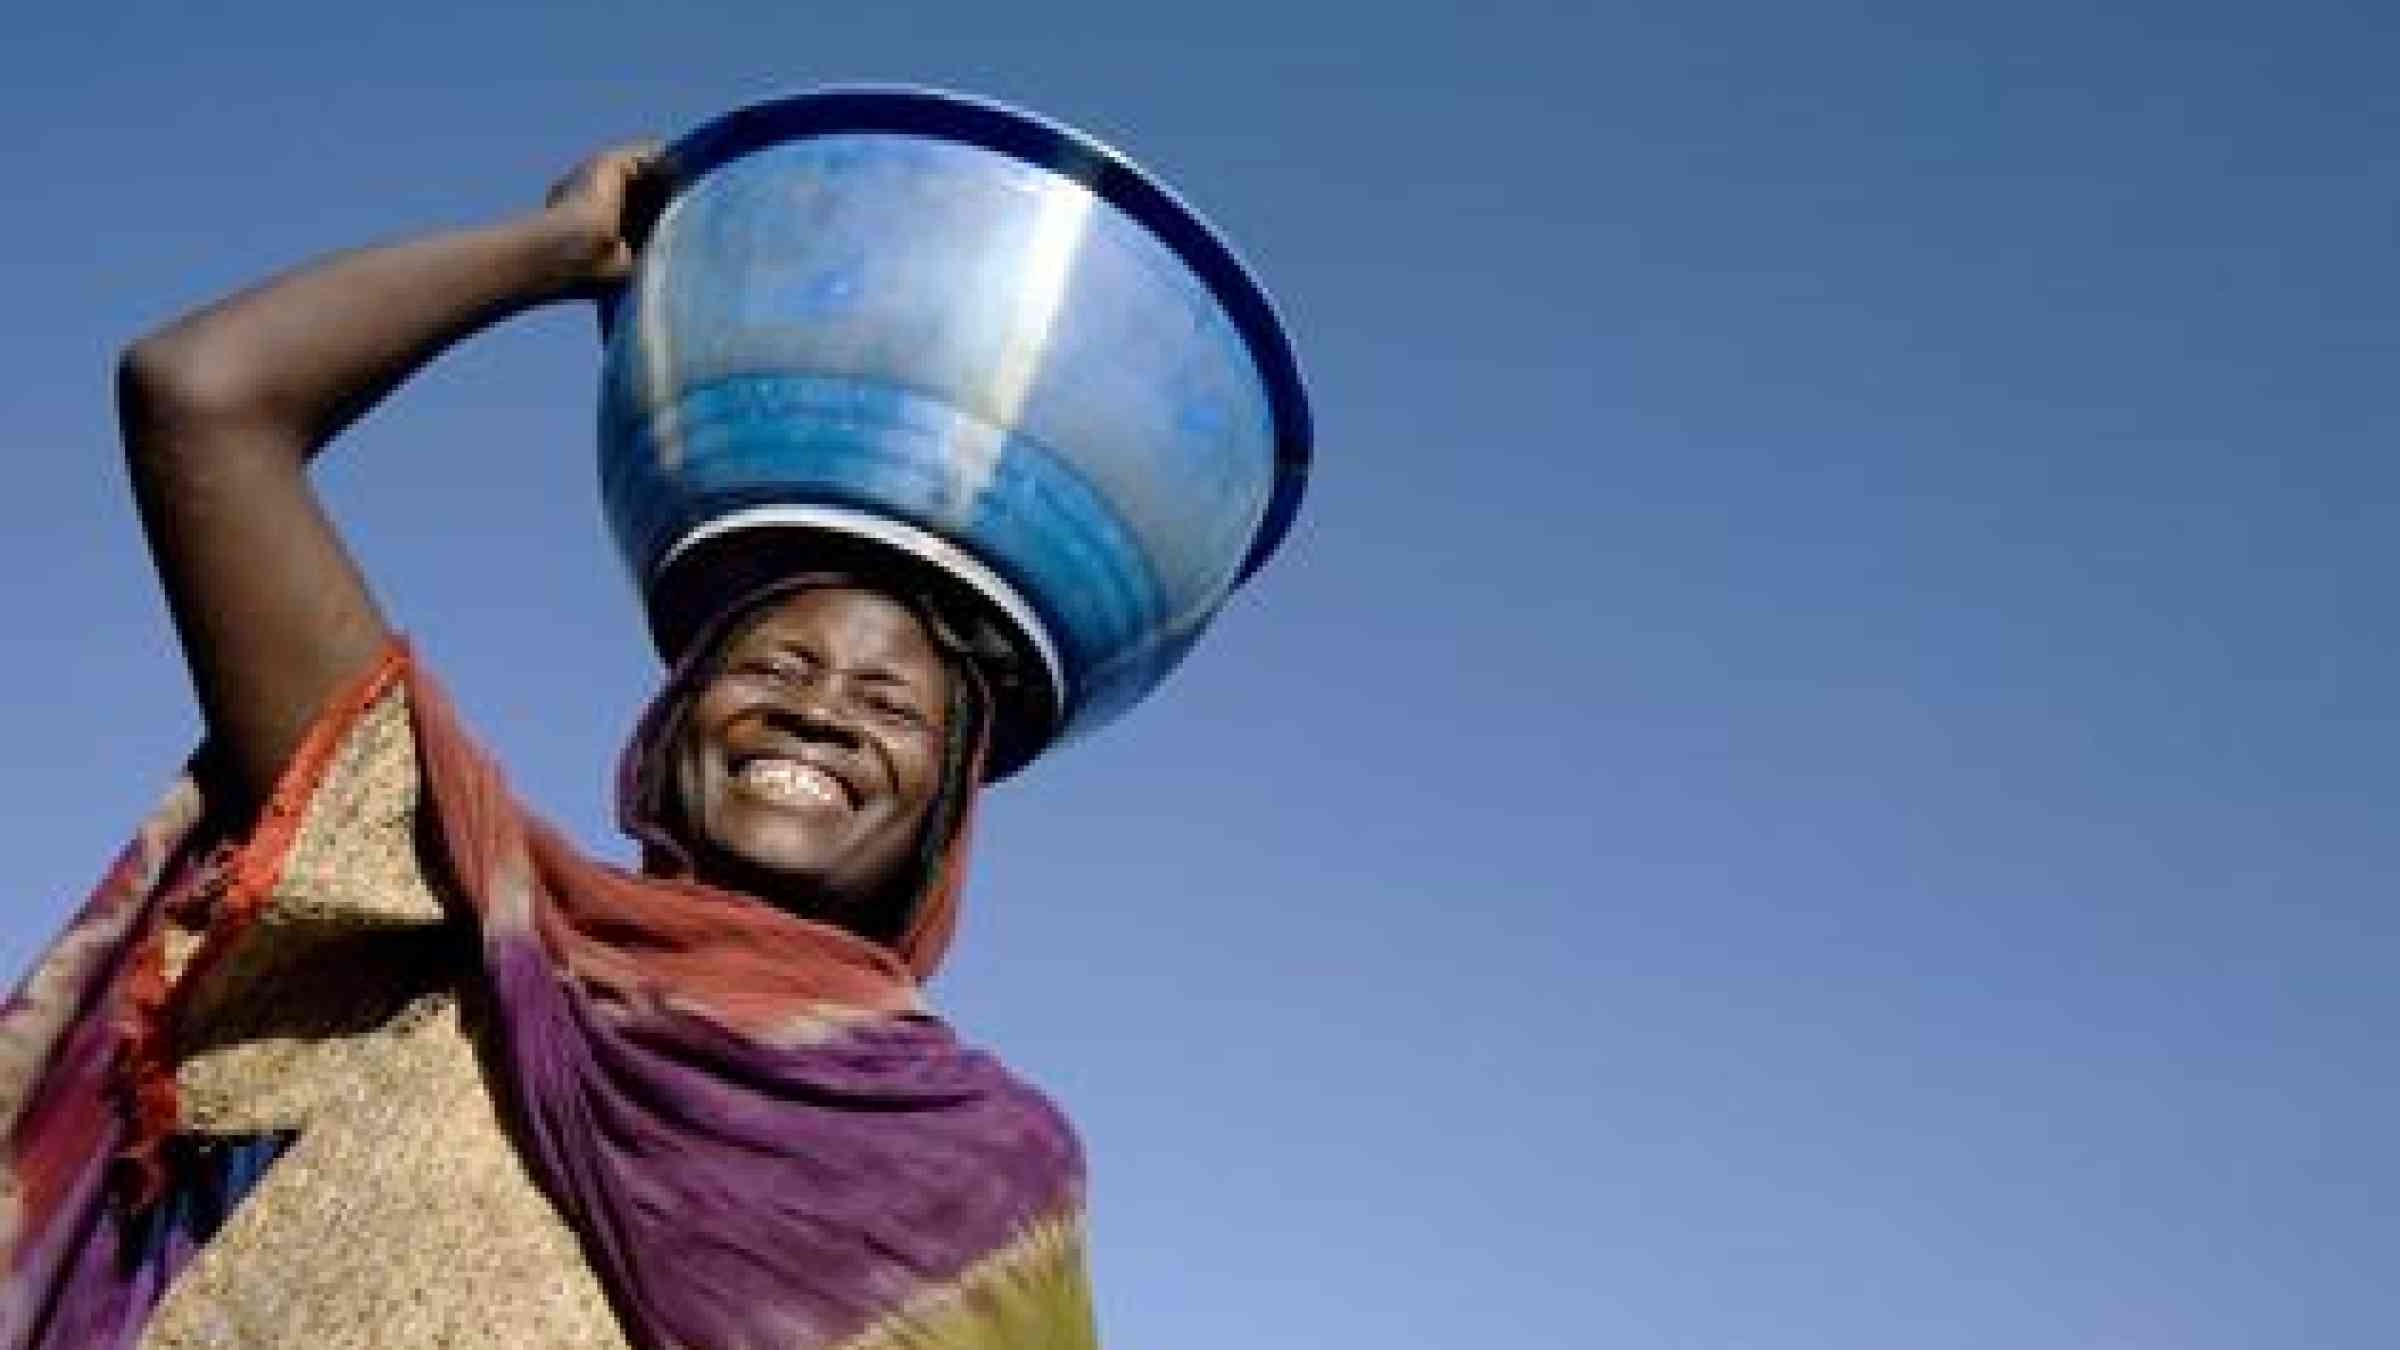 A woman carries water on her head at a settlement for displaced people in Goz Beida, eastern Chad. (Photo: Kate Holt/IRIN)